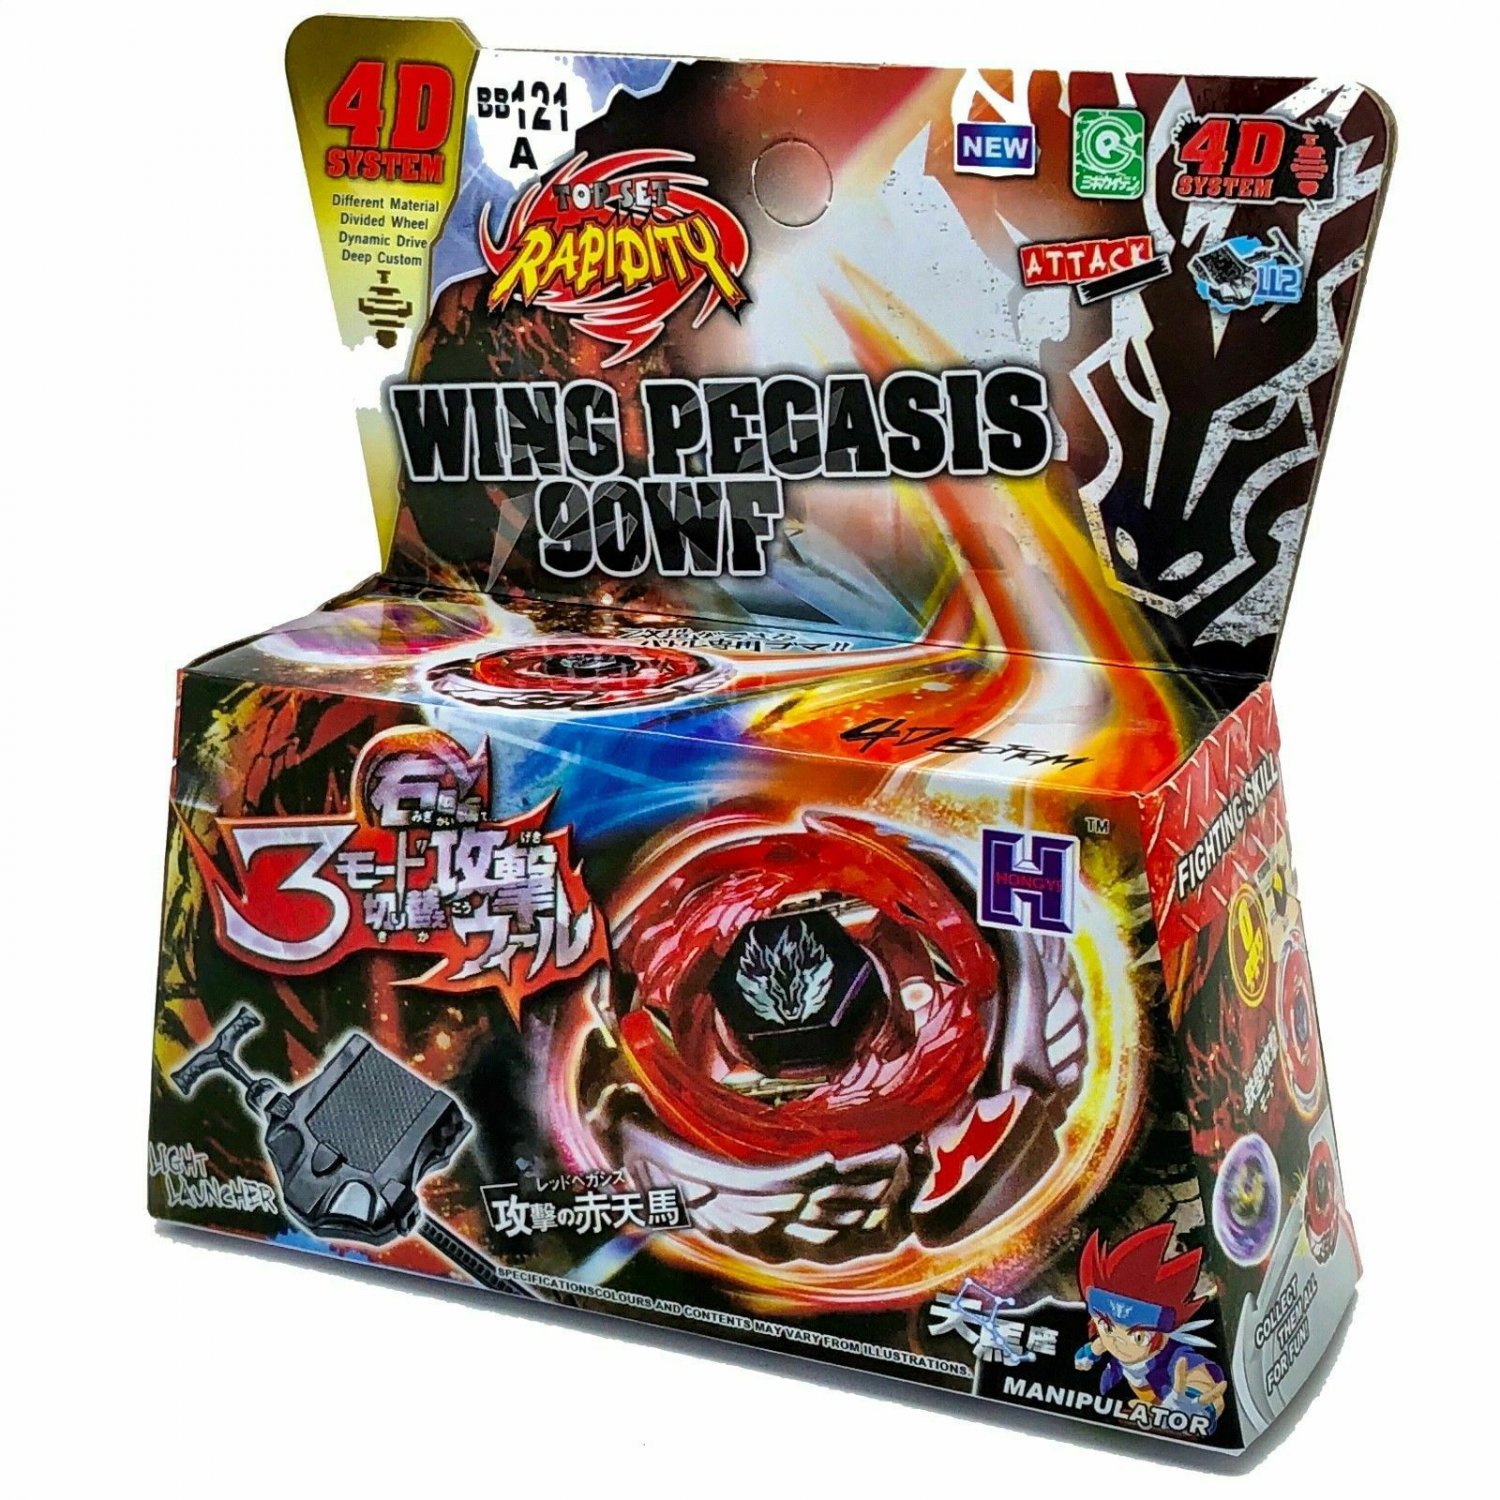 BB-121A With Launcher Set Pegasus Beyblade Wing Pegasis USA SELLER 